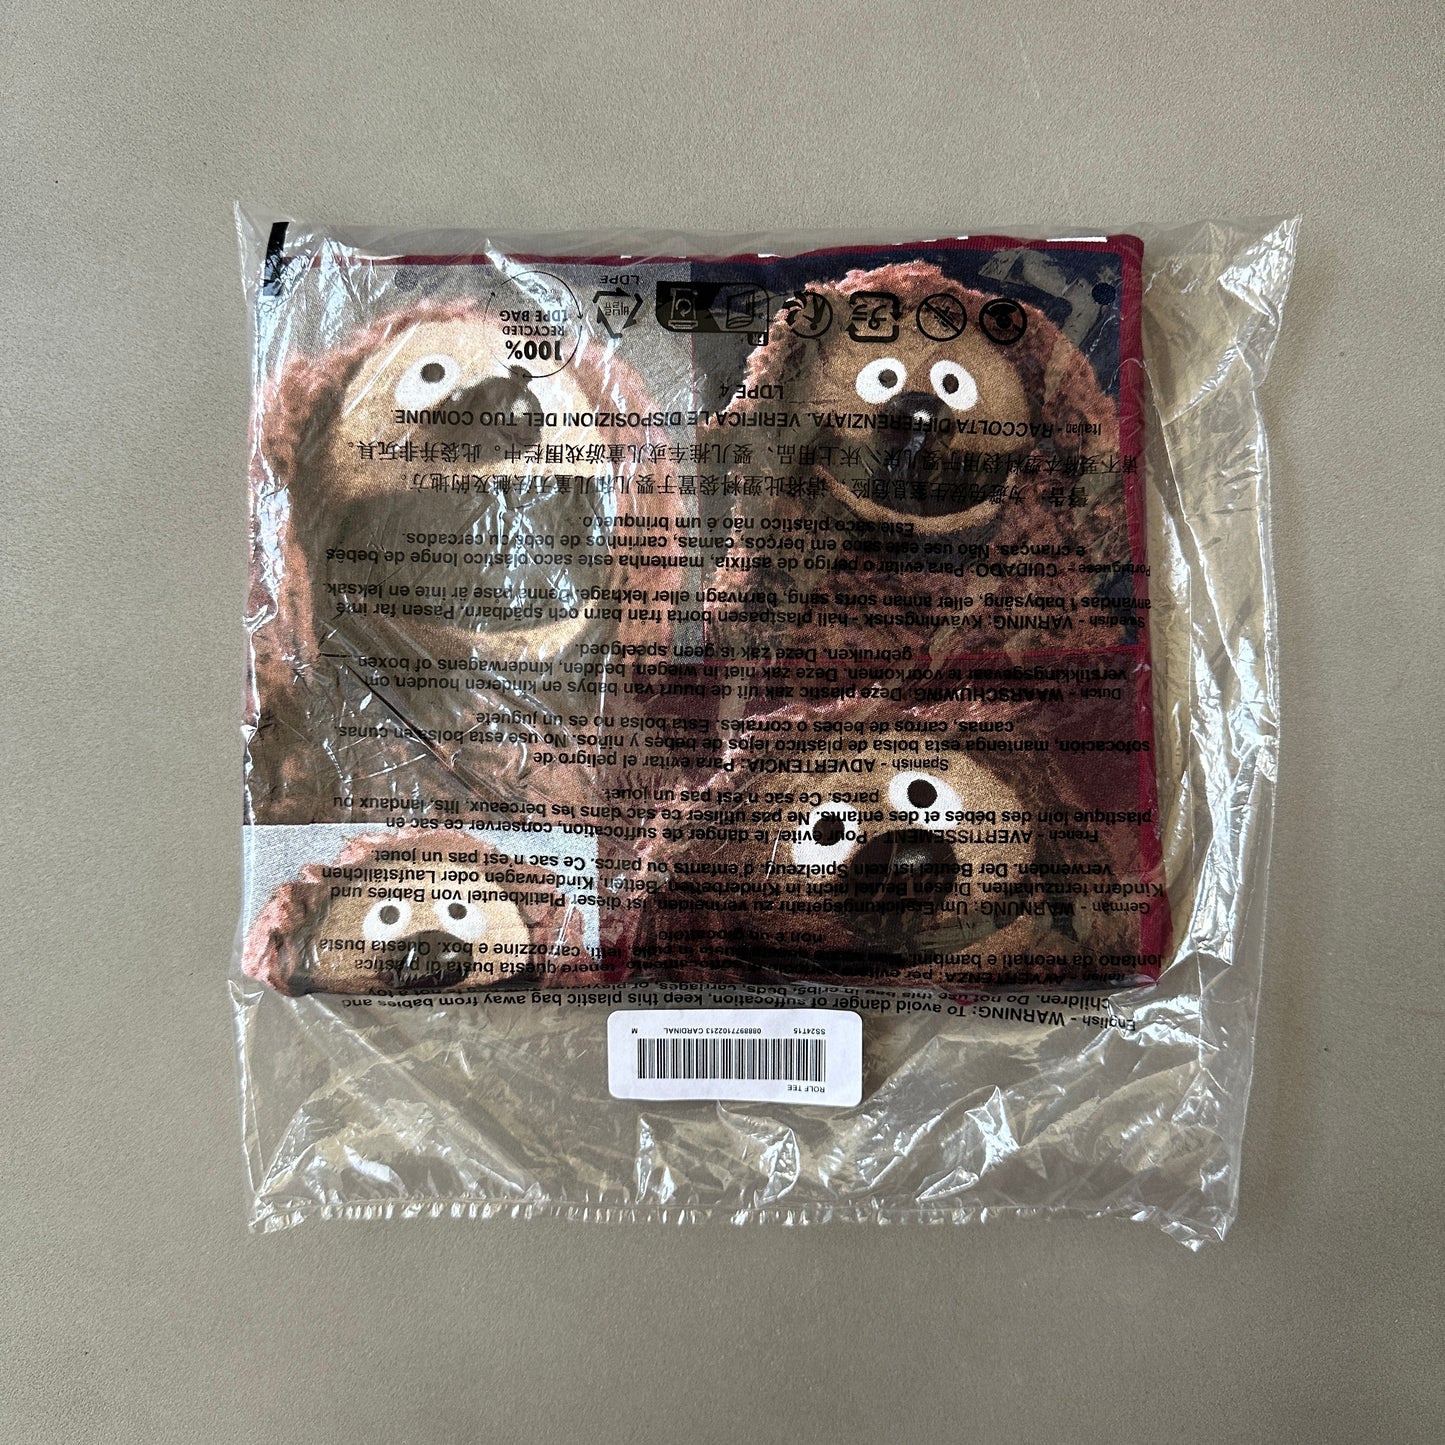 Supreme x The Muppets - Rowlf Photo T-Shirt (Cardinal Red)